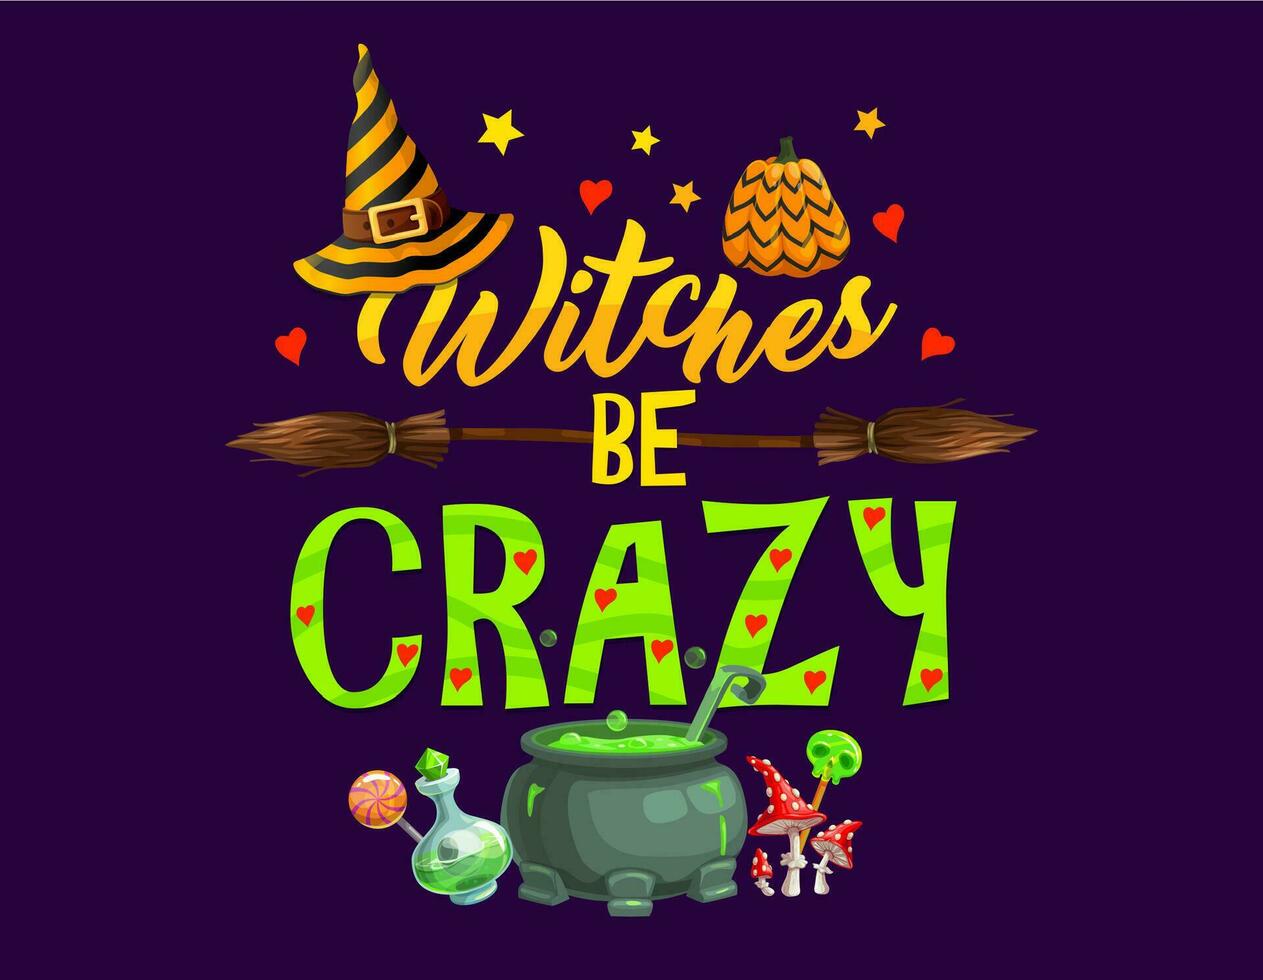 Witches be crazy, Halloween quote typography vector